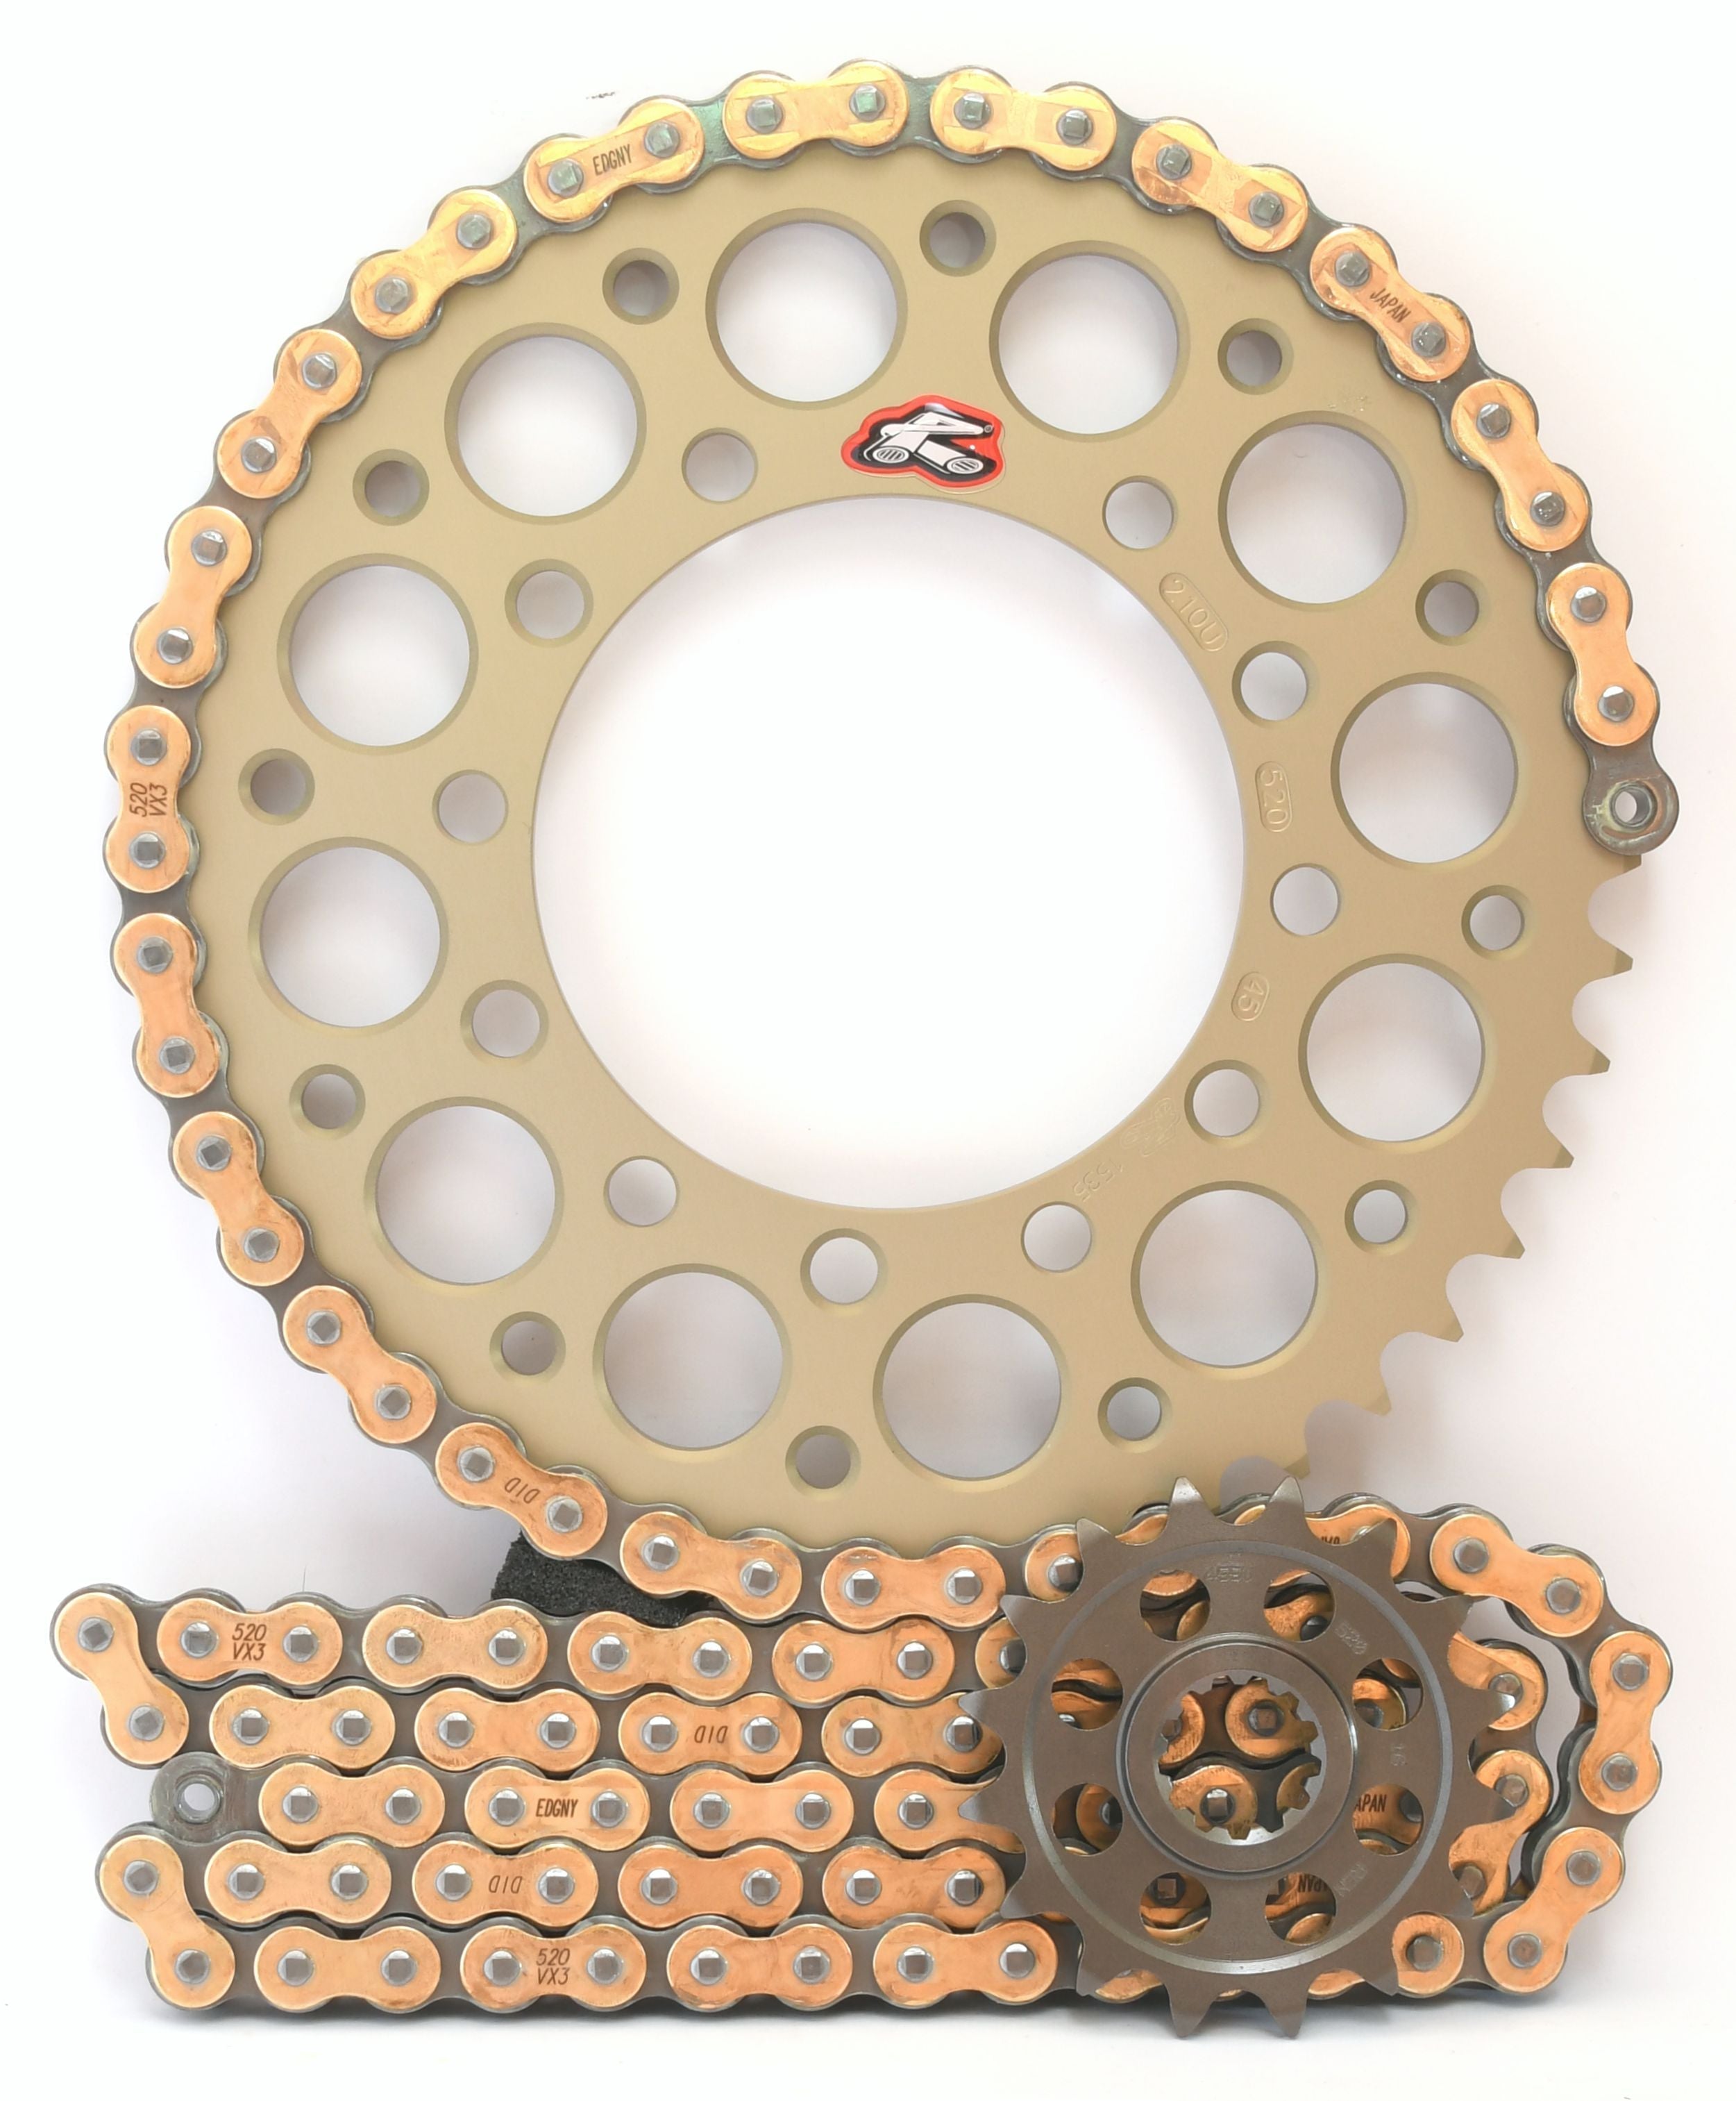 Renthal Ultralight and DID 520 Conversion Chain & Sprocket Kit for Kawasaki ZX10R 2006-2007 - Standard Gearing